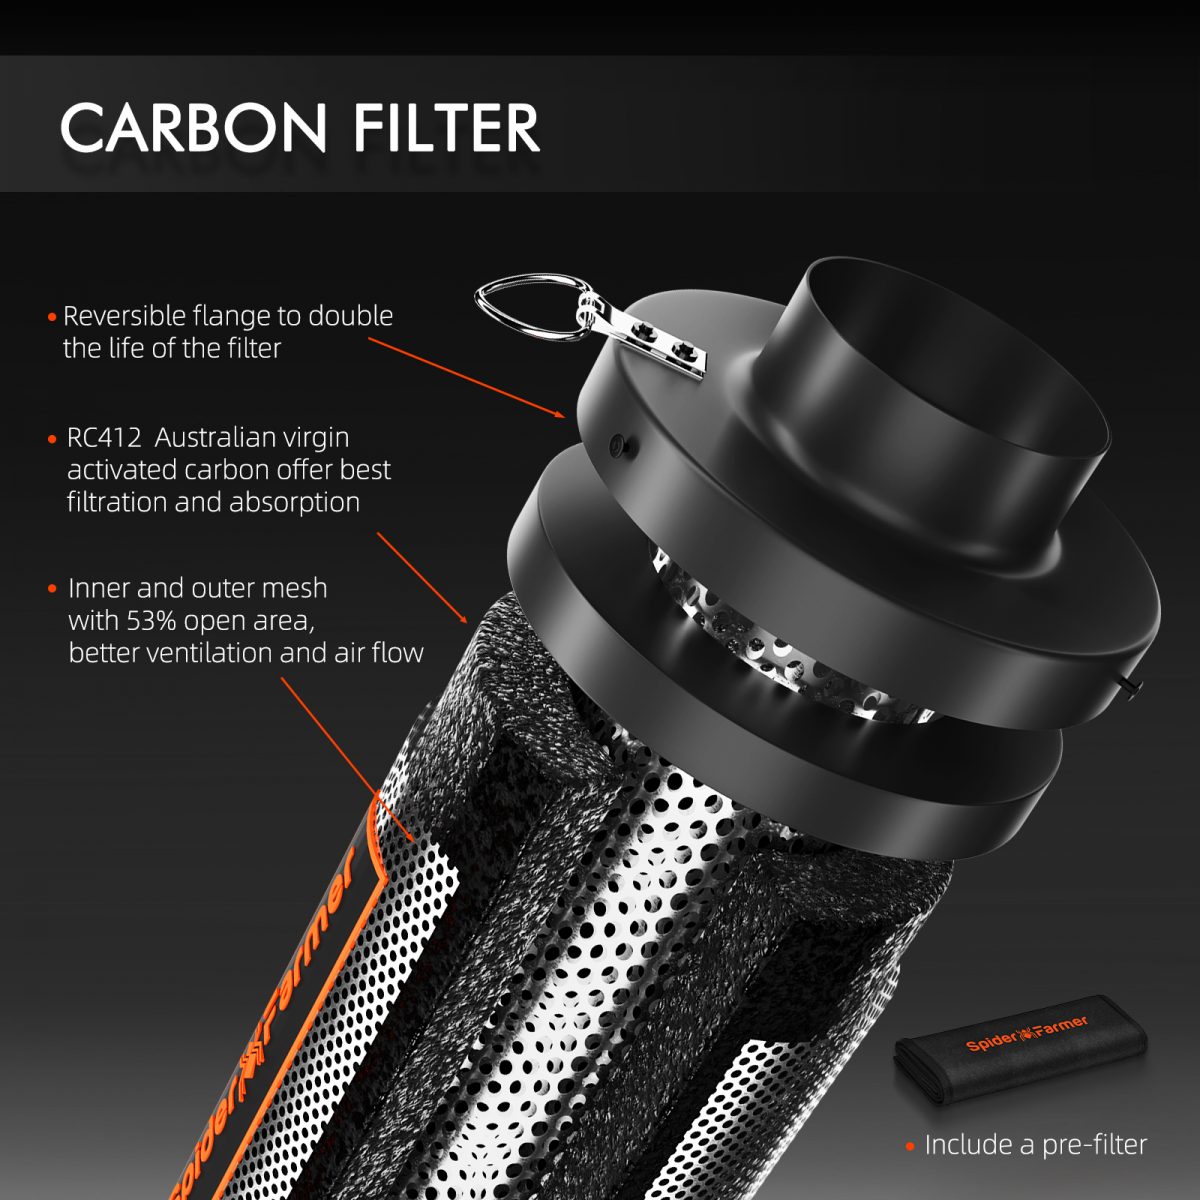 Spider Farmer Carbon Filter Specifications for Grow Tent Air Filtration